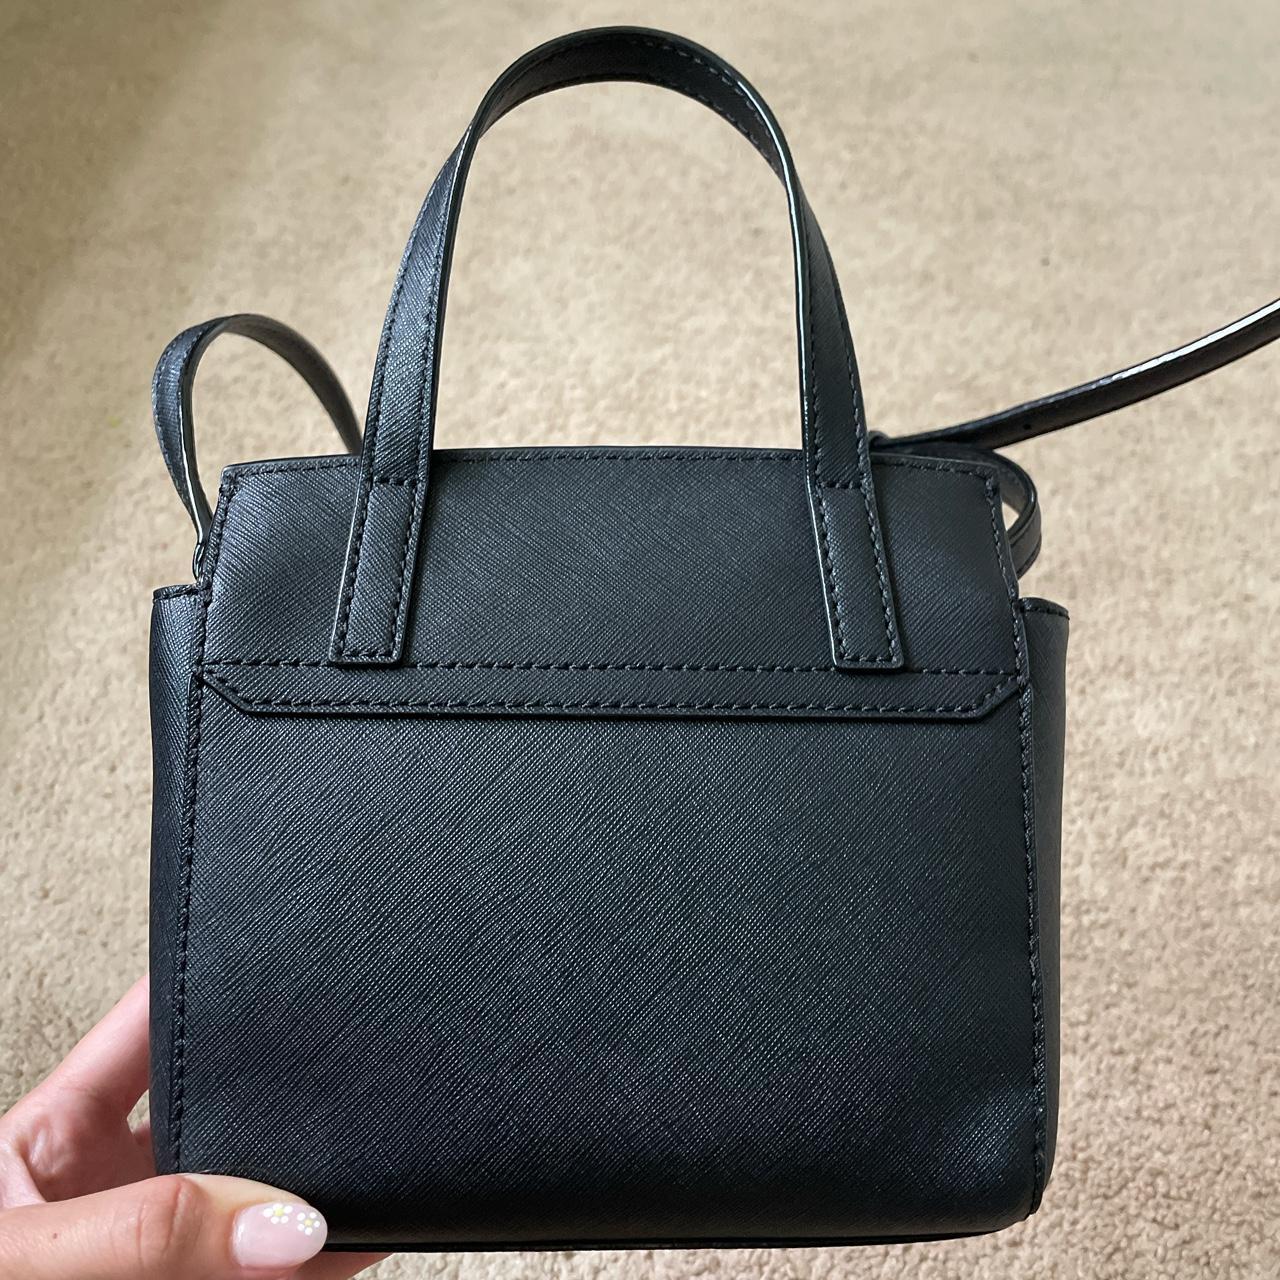 kate spade crossbody black purse small and cute for - Depop